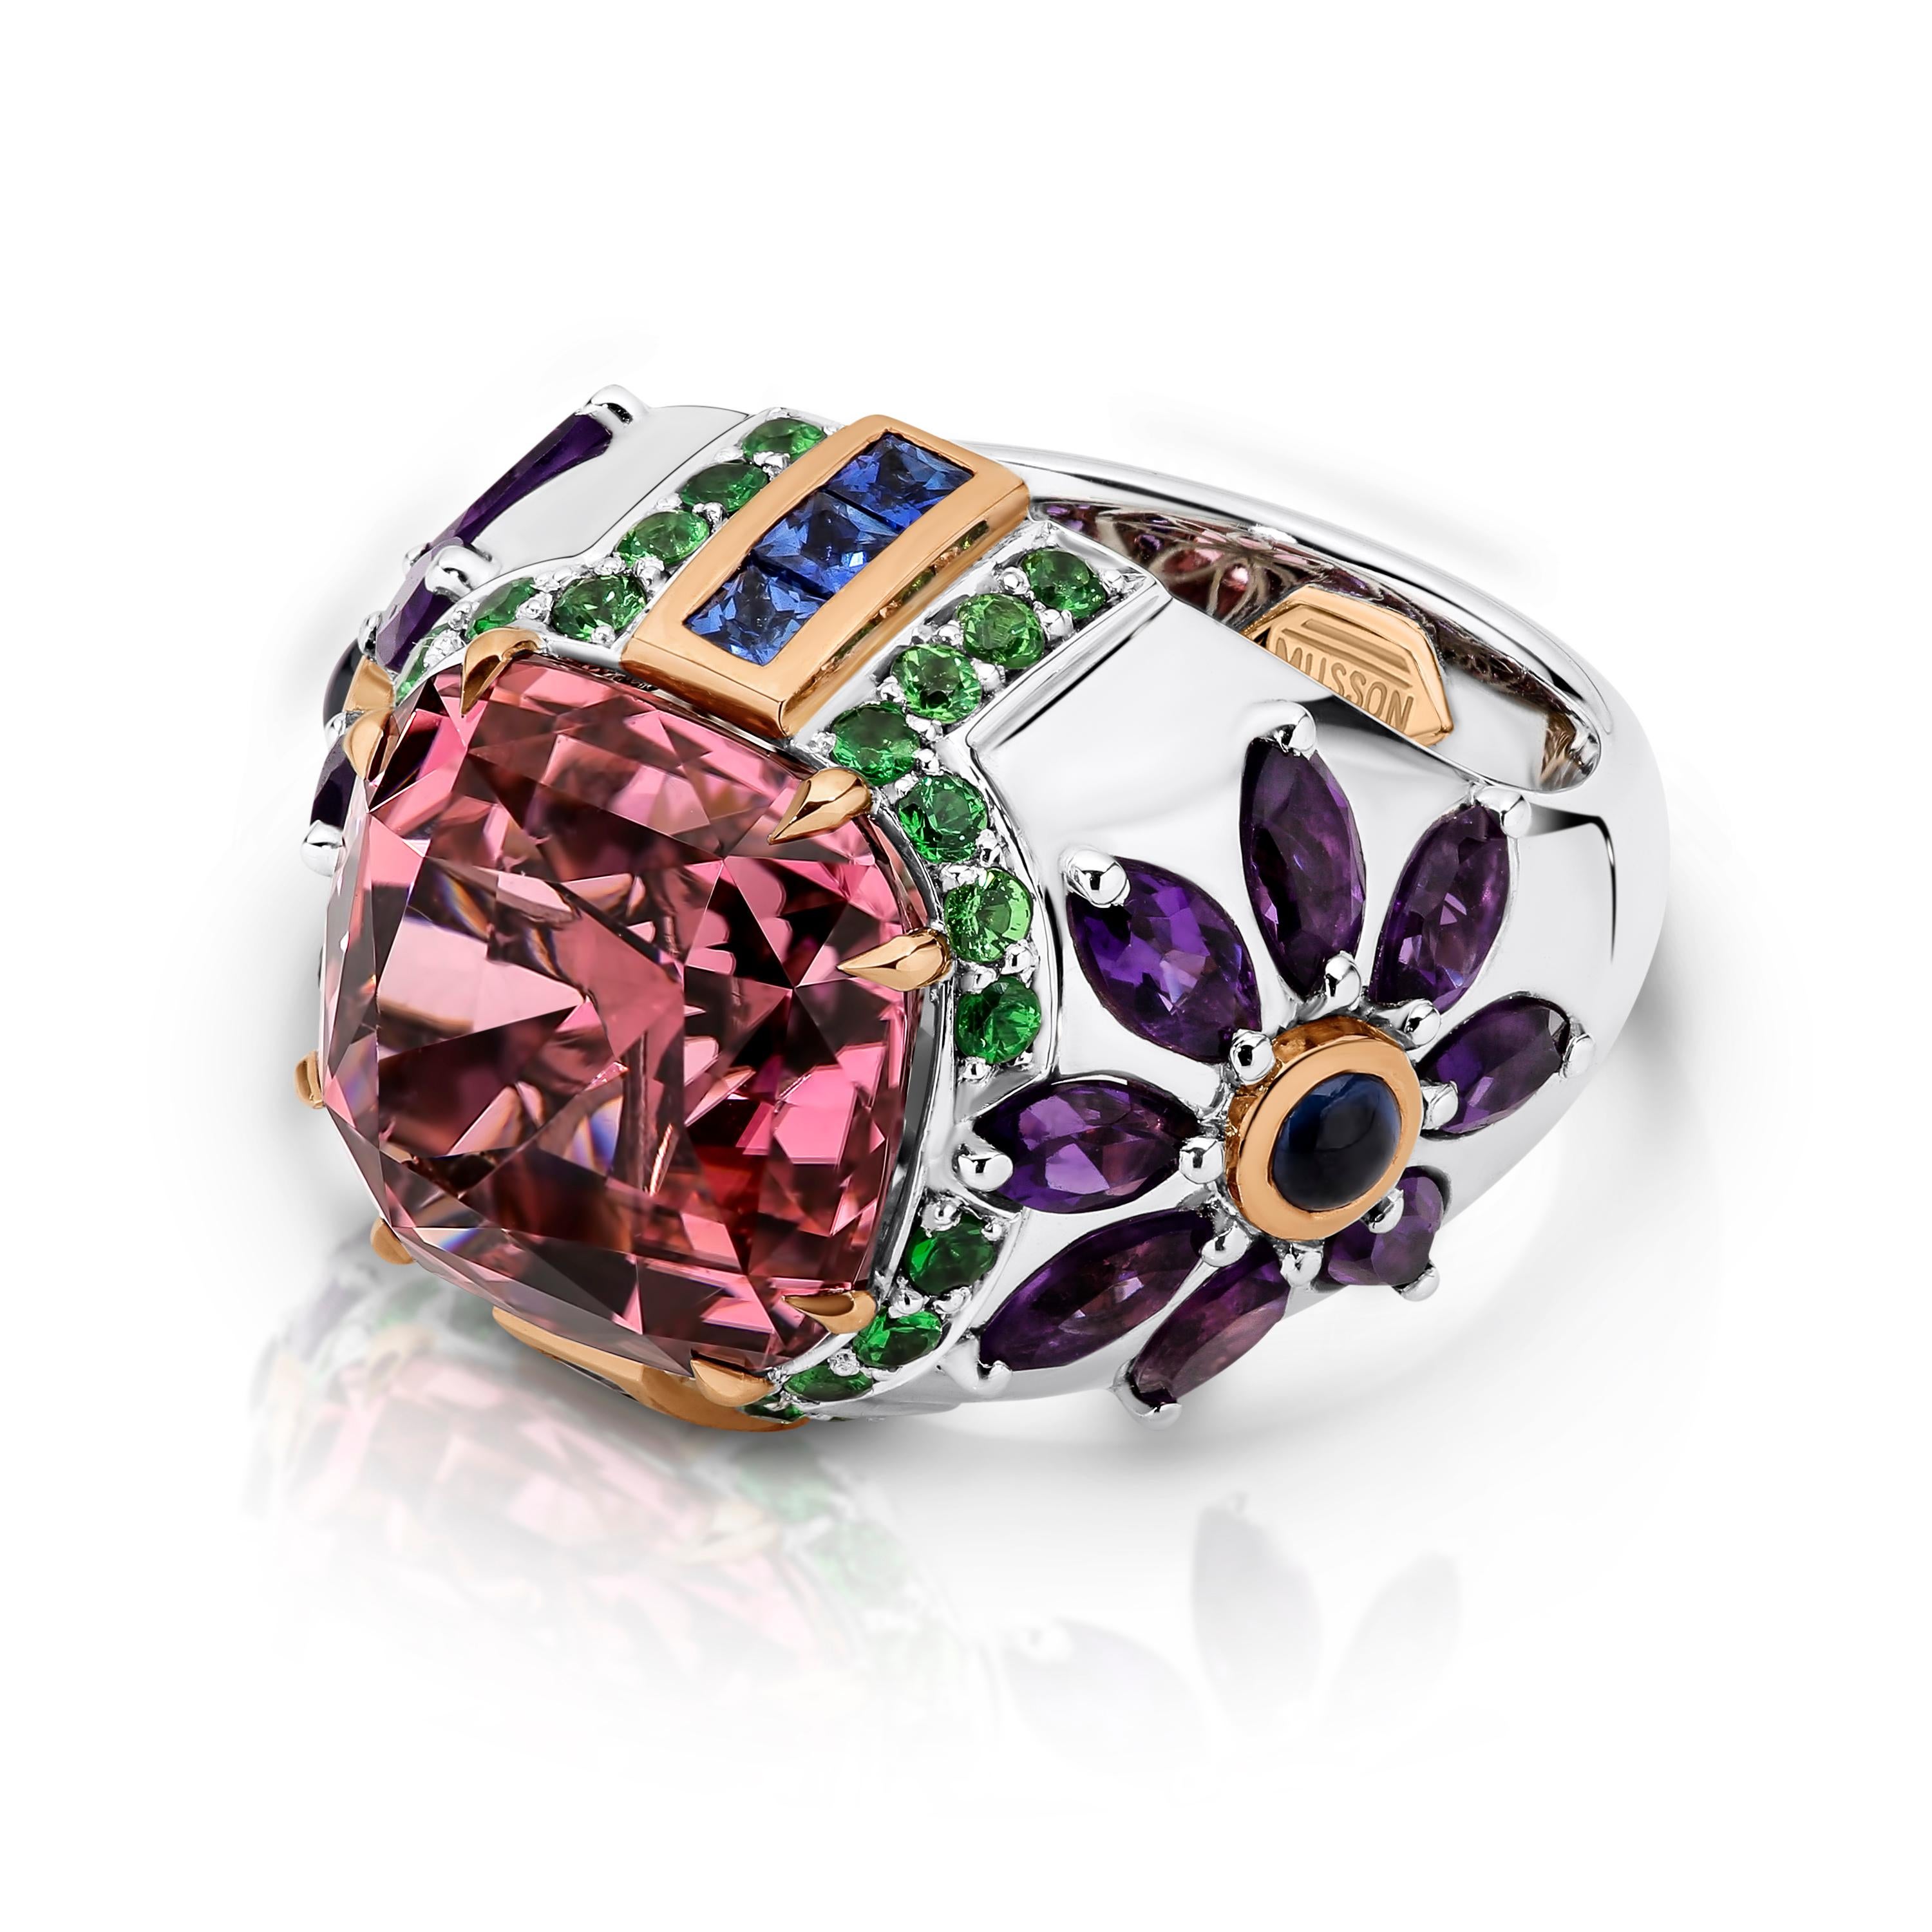 18ct white and rose gold Tourmaline, Garnet, Sapphire, Amethyst 'Poppy' ring designed and produced by Musson. Reference: R35313. The ring is a white gold, tapered domed style and features a large central cushion cut pink tourmaline double claw set